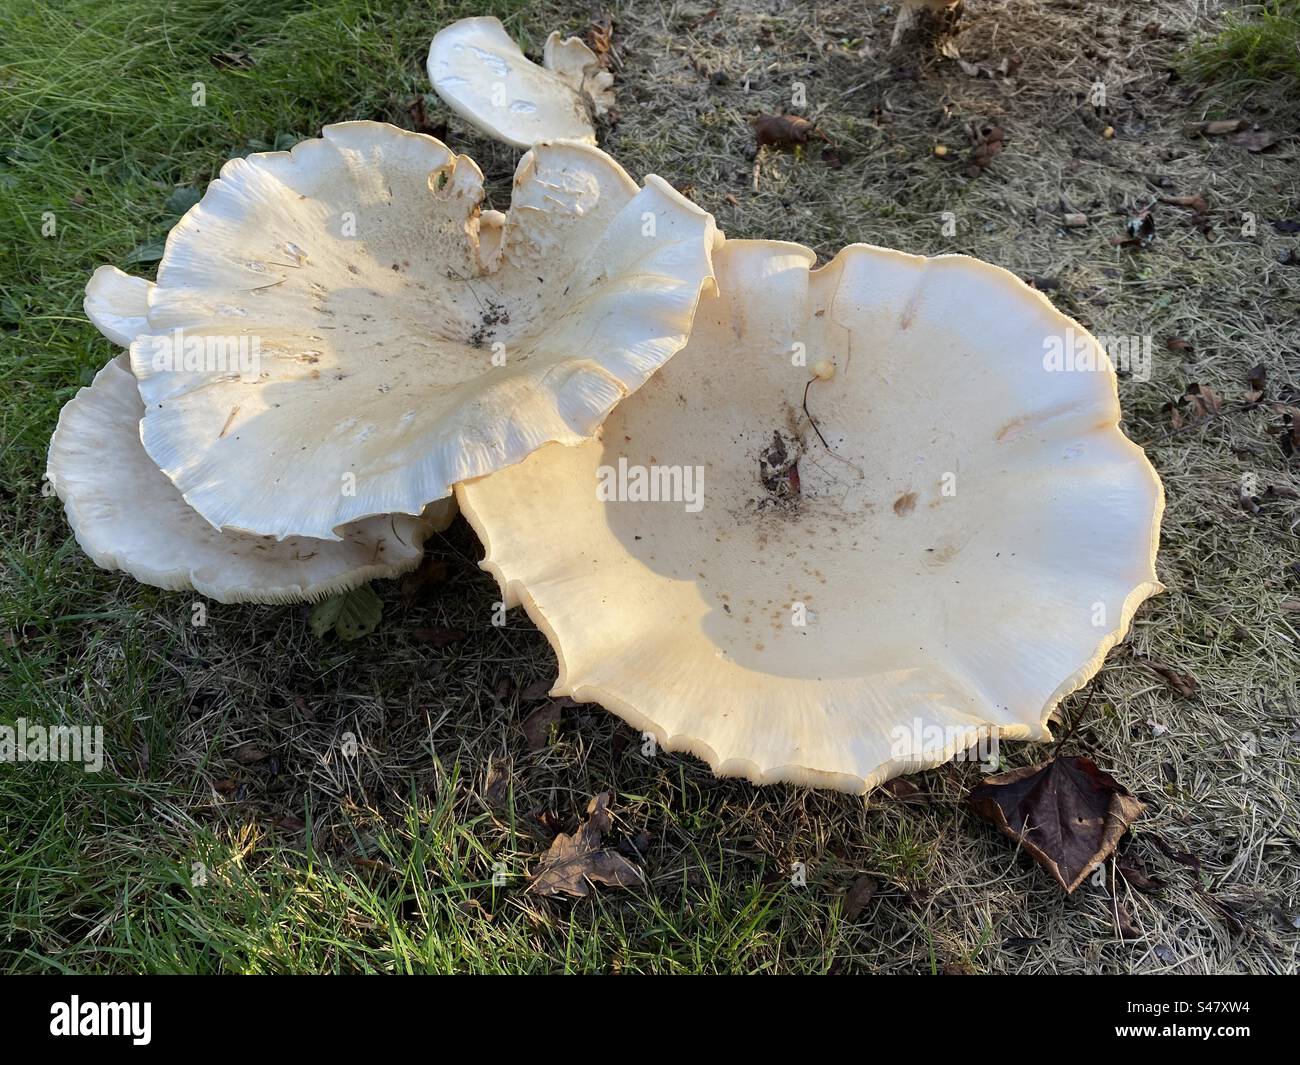 Very large giant fennel mushrooms Stock Photo